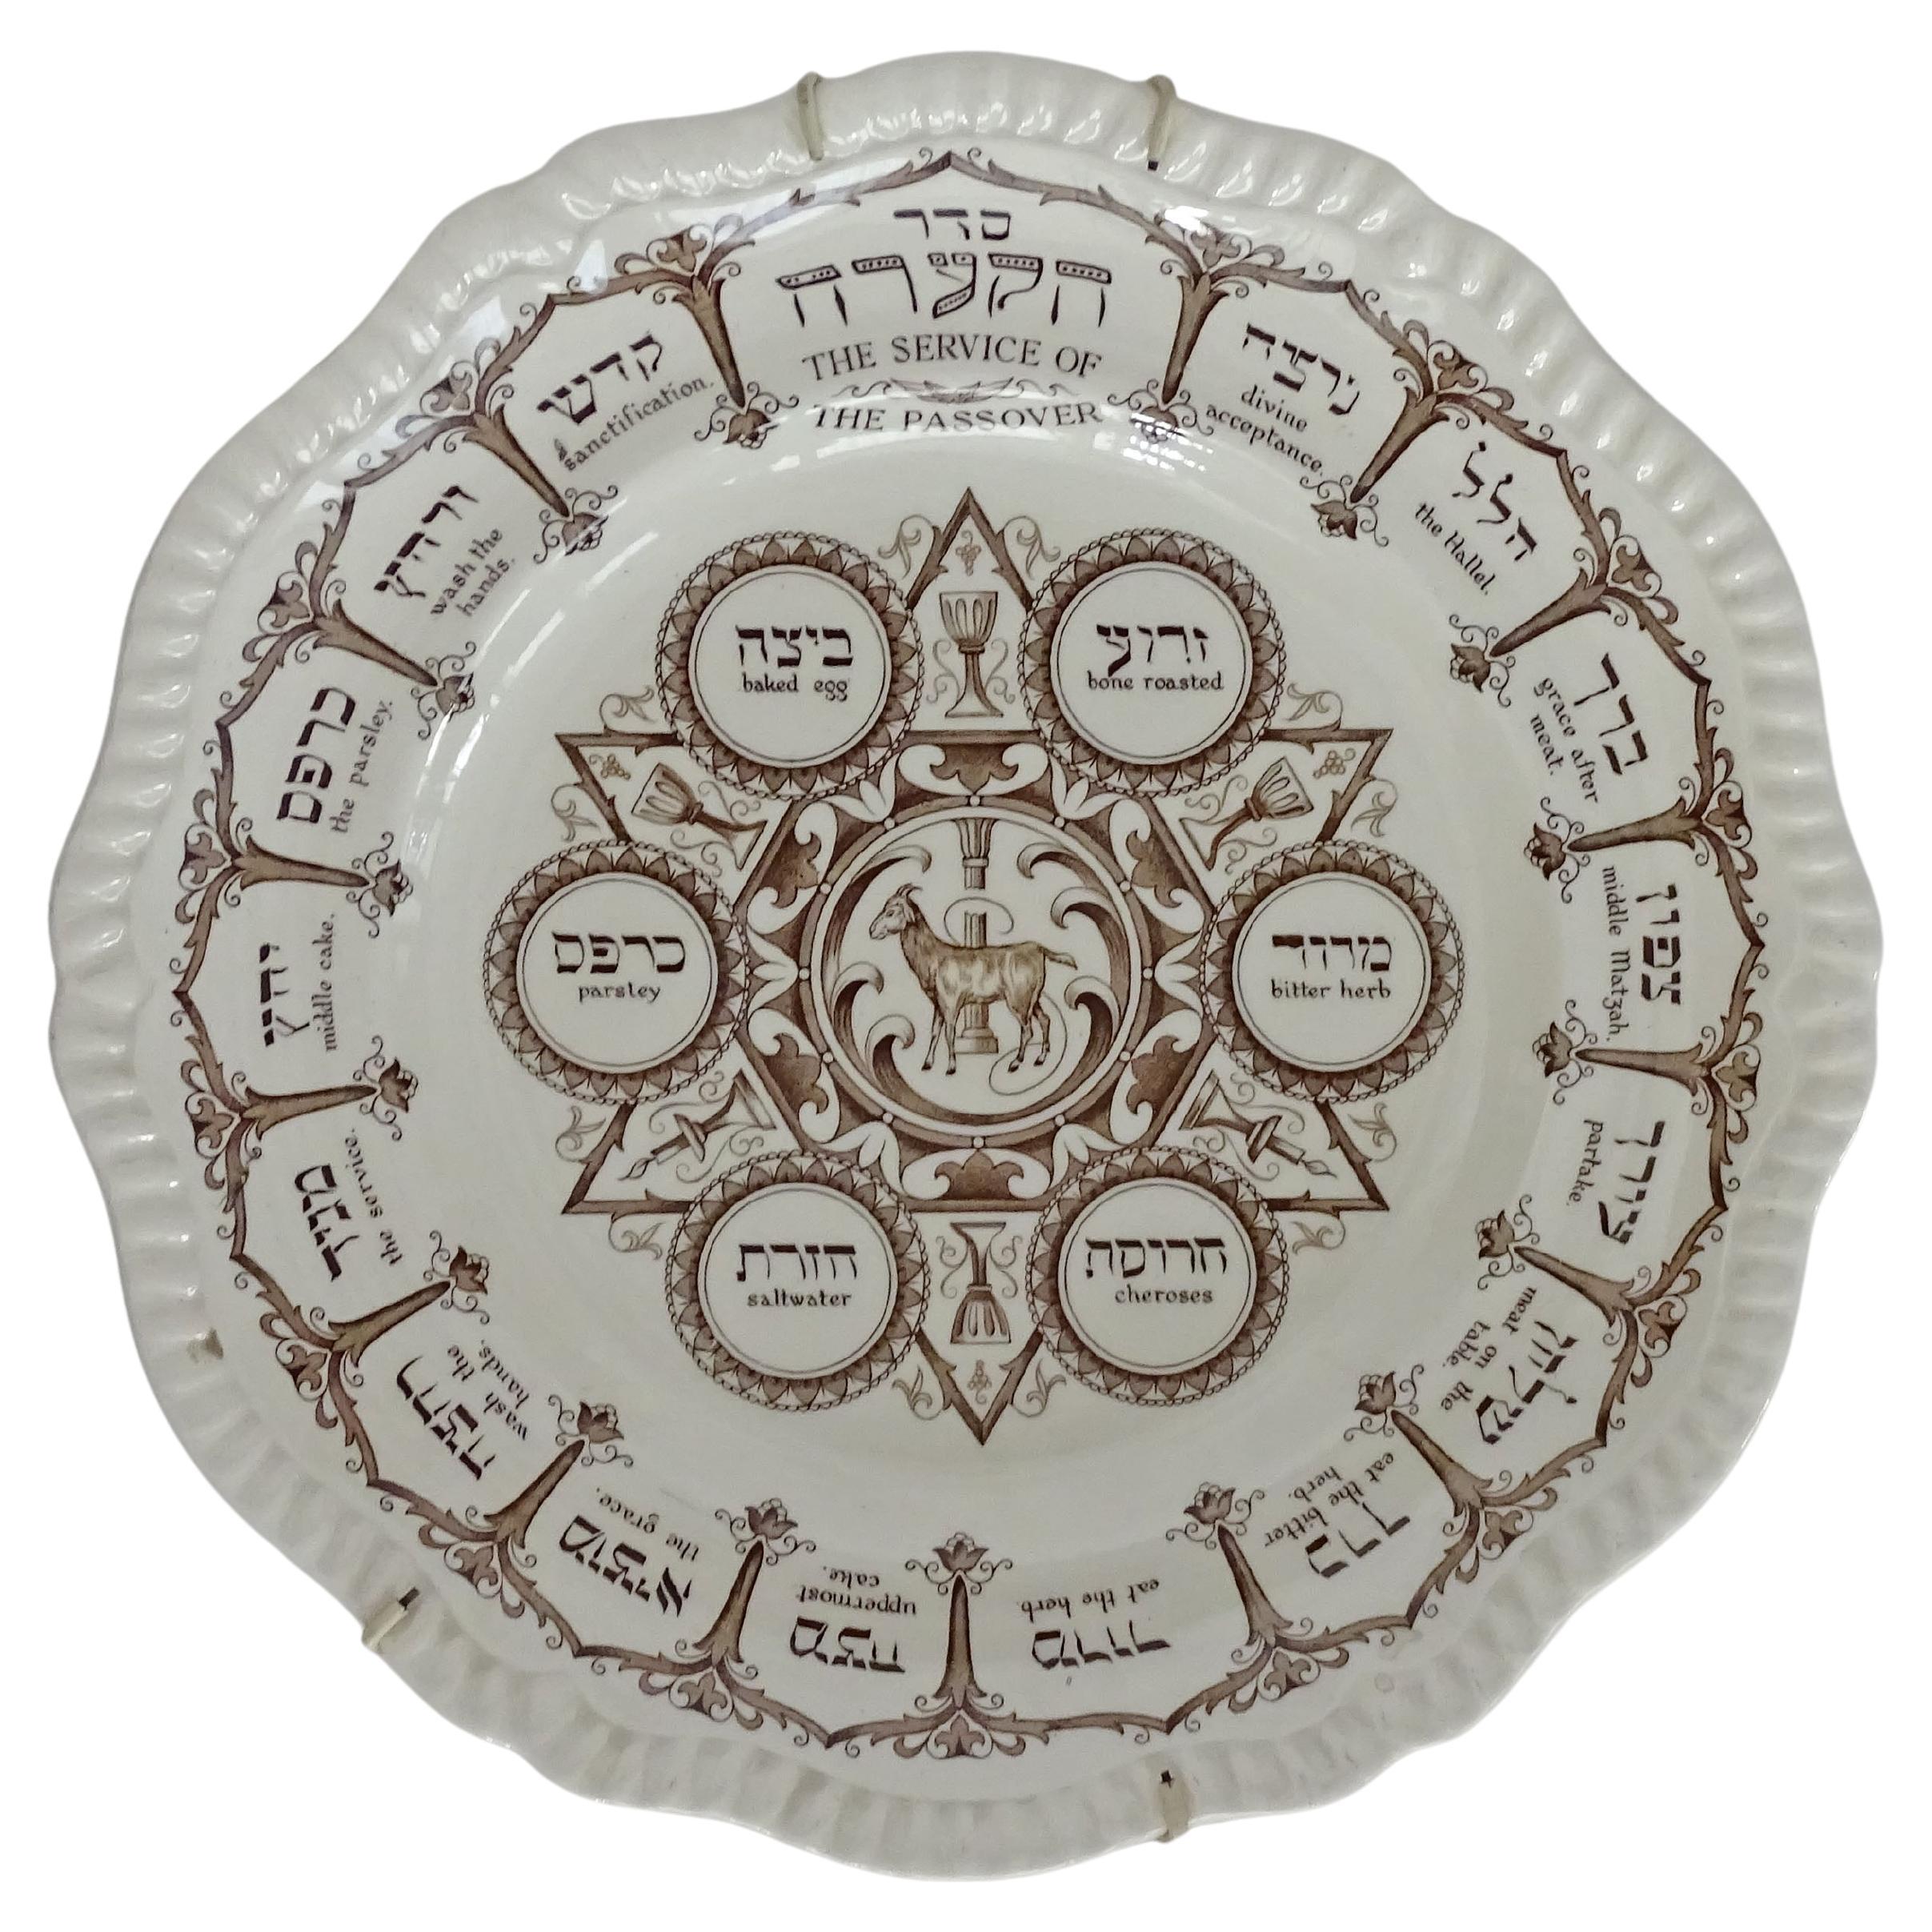 Pesach "Seder" plate by Copeland Spode, England 1950s For Sale